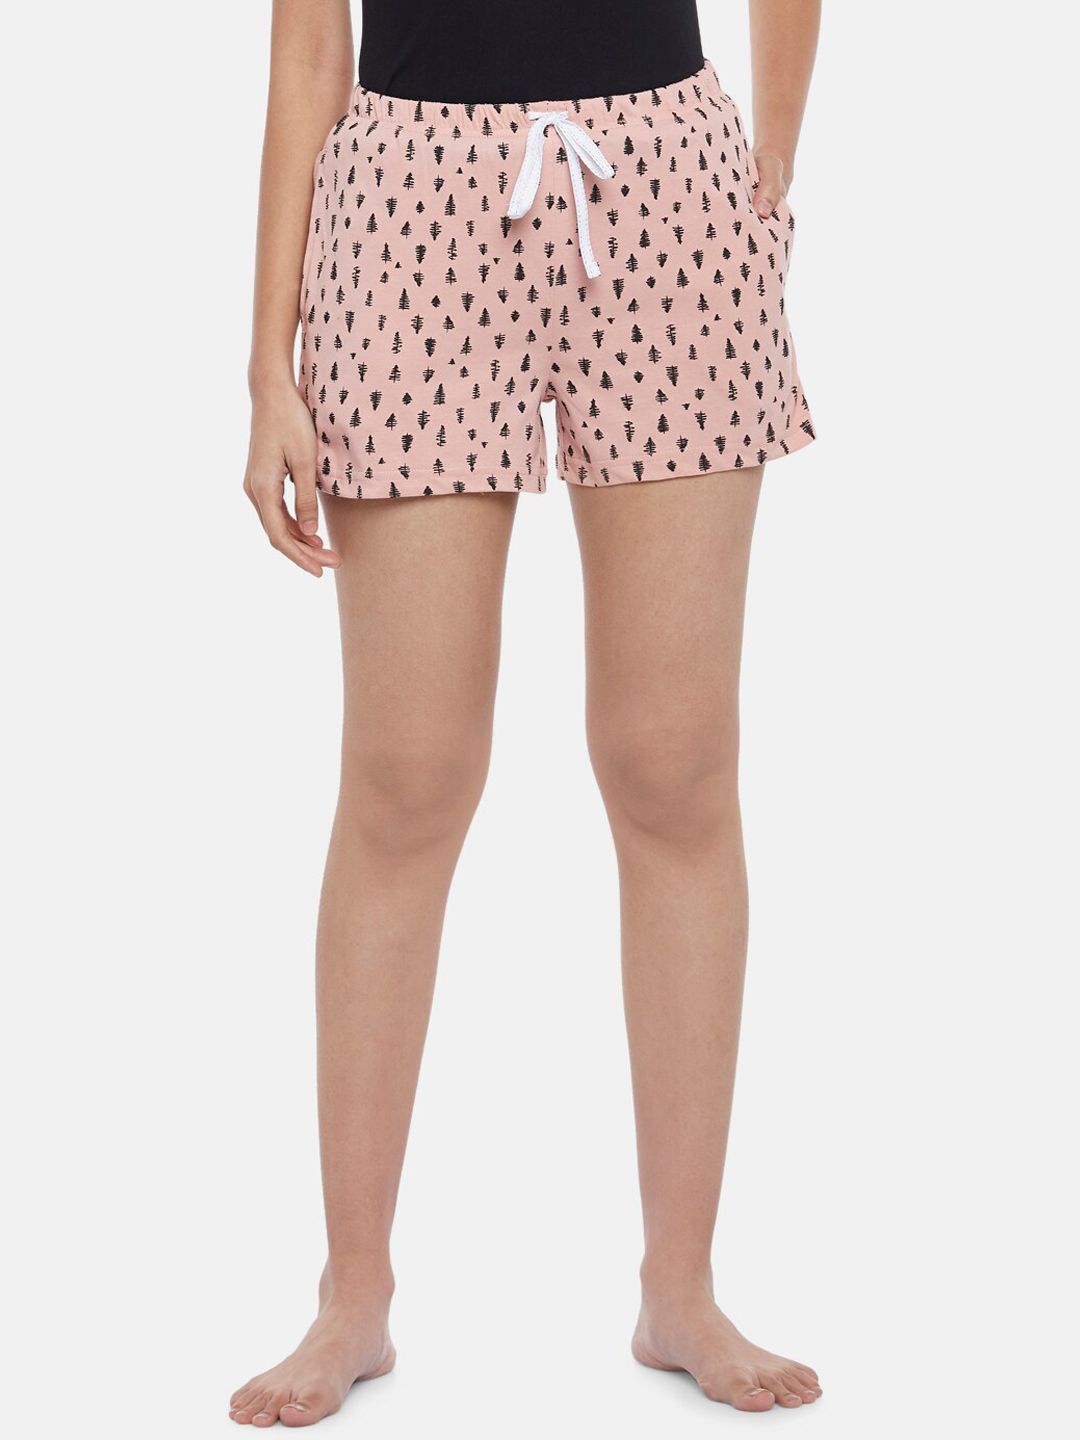 Dreamz by Pantaloons Women Peach-Coloured & Black Printed Cotton Lounge Shorts Price in India